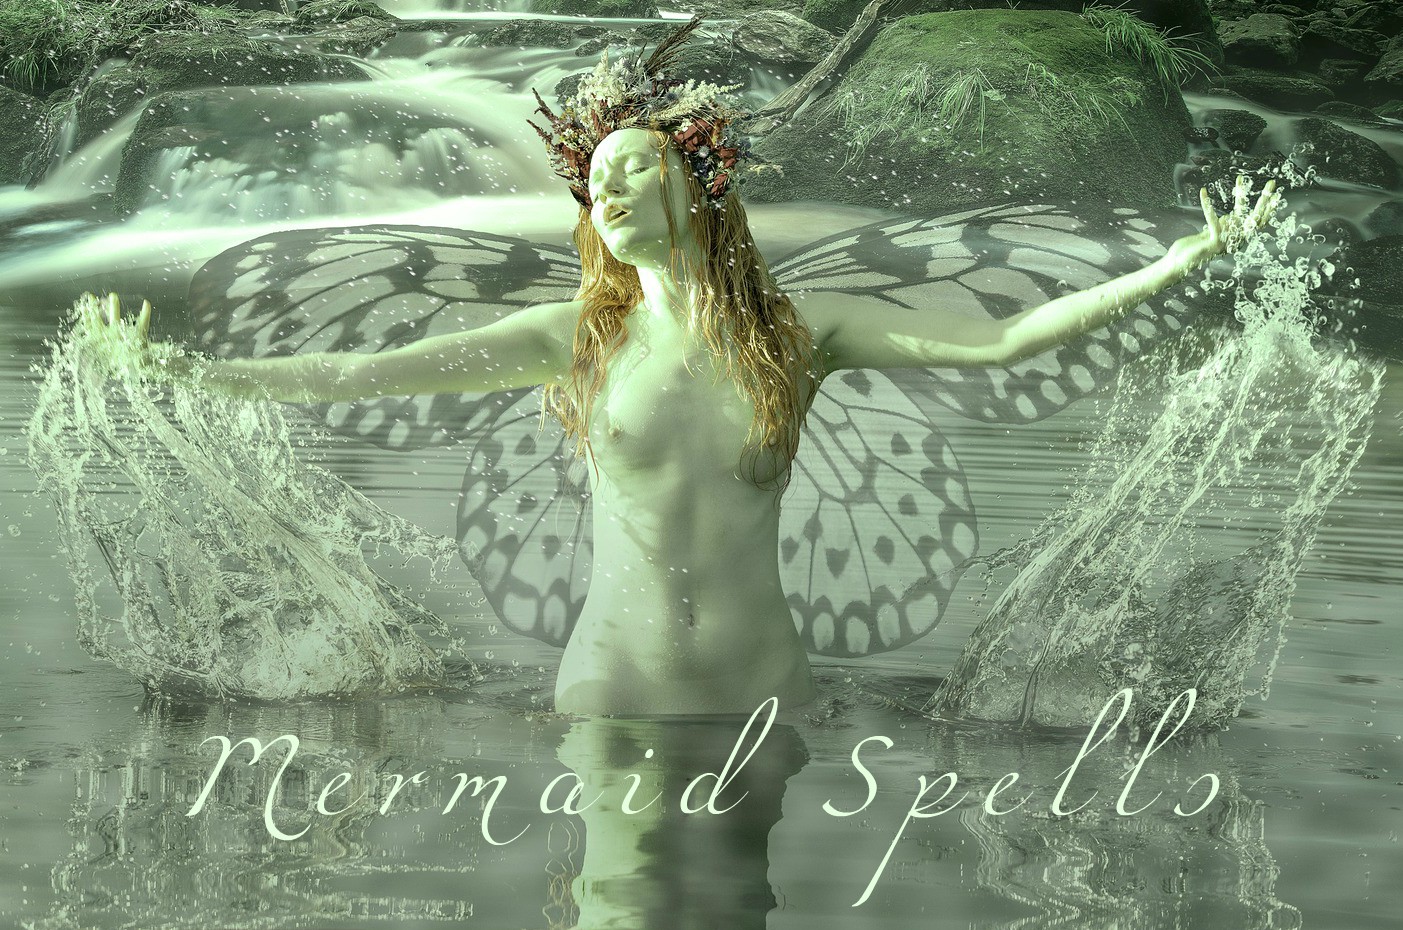 If you would like to reduce stress, find your soulmate, heal from an ailment and more, these mermaid spells will help you to call upon the power within.